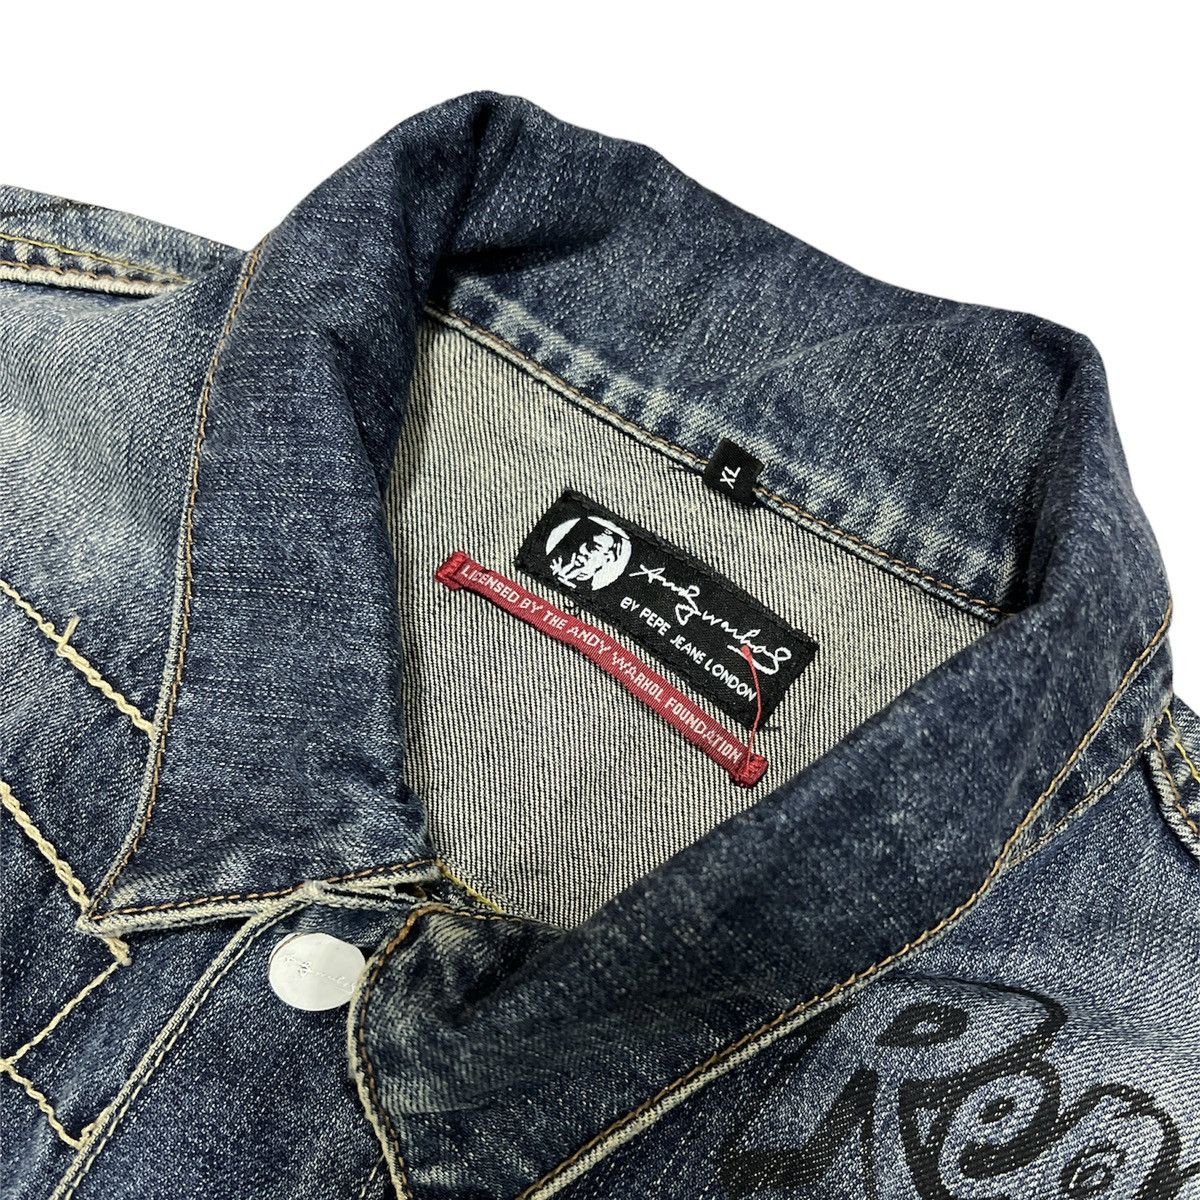 Andy Warhol by Pepe Jeans Type III Jacket - 2